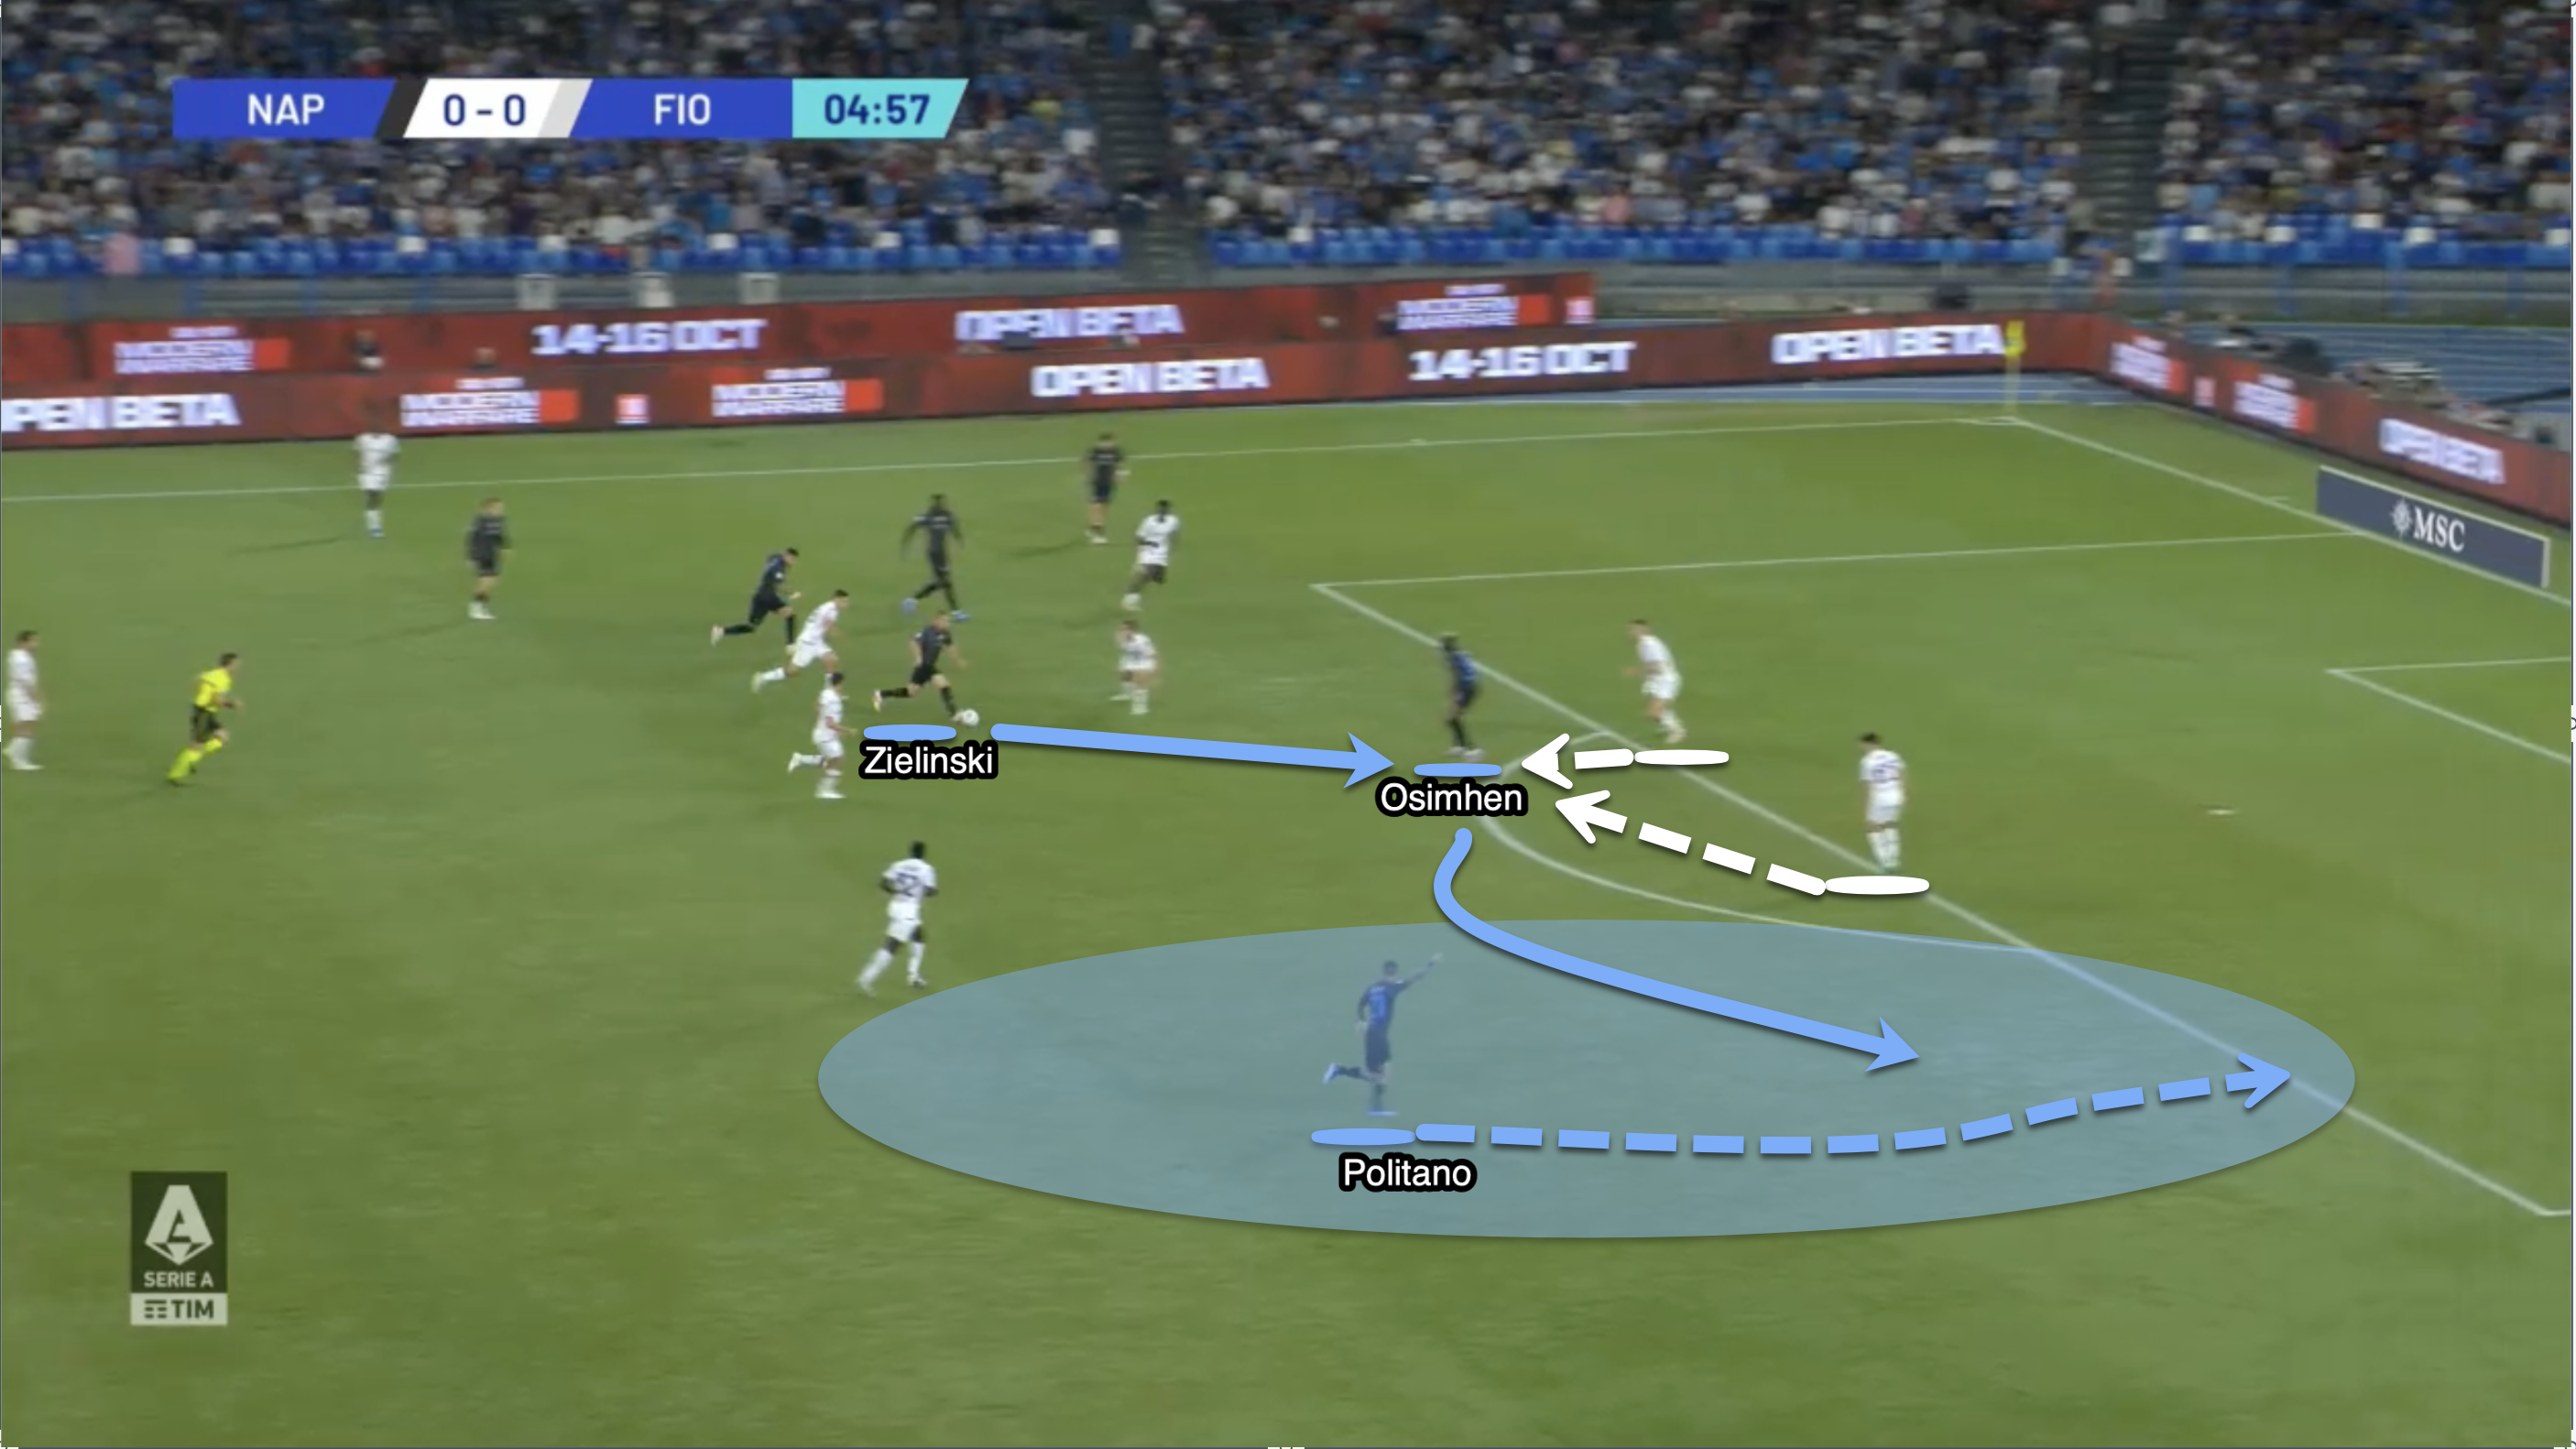 Osimhen is in a central position, and as he receives the ball he has attracted two defensive players over to him. This creates space on the near side for the winger and Osimhen bounces the ball outside to create a chance